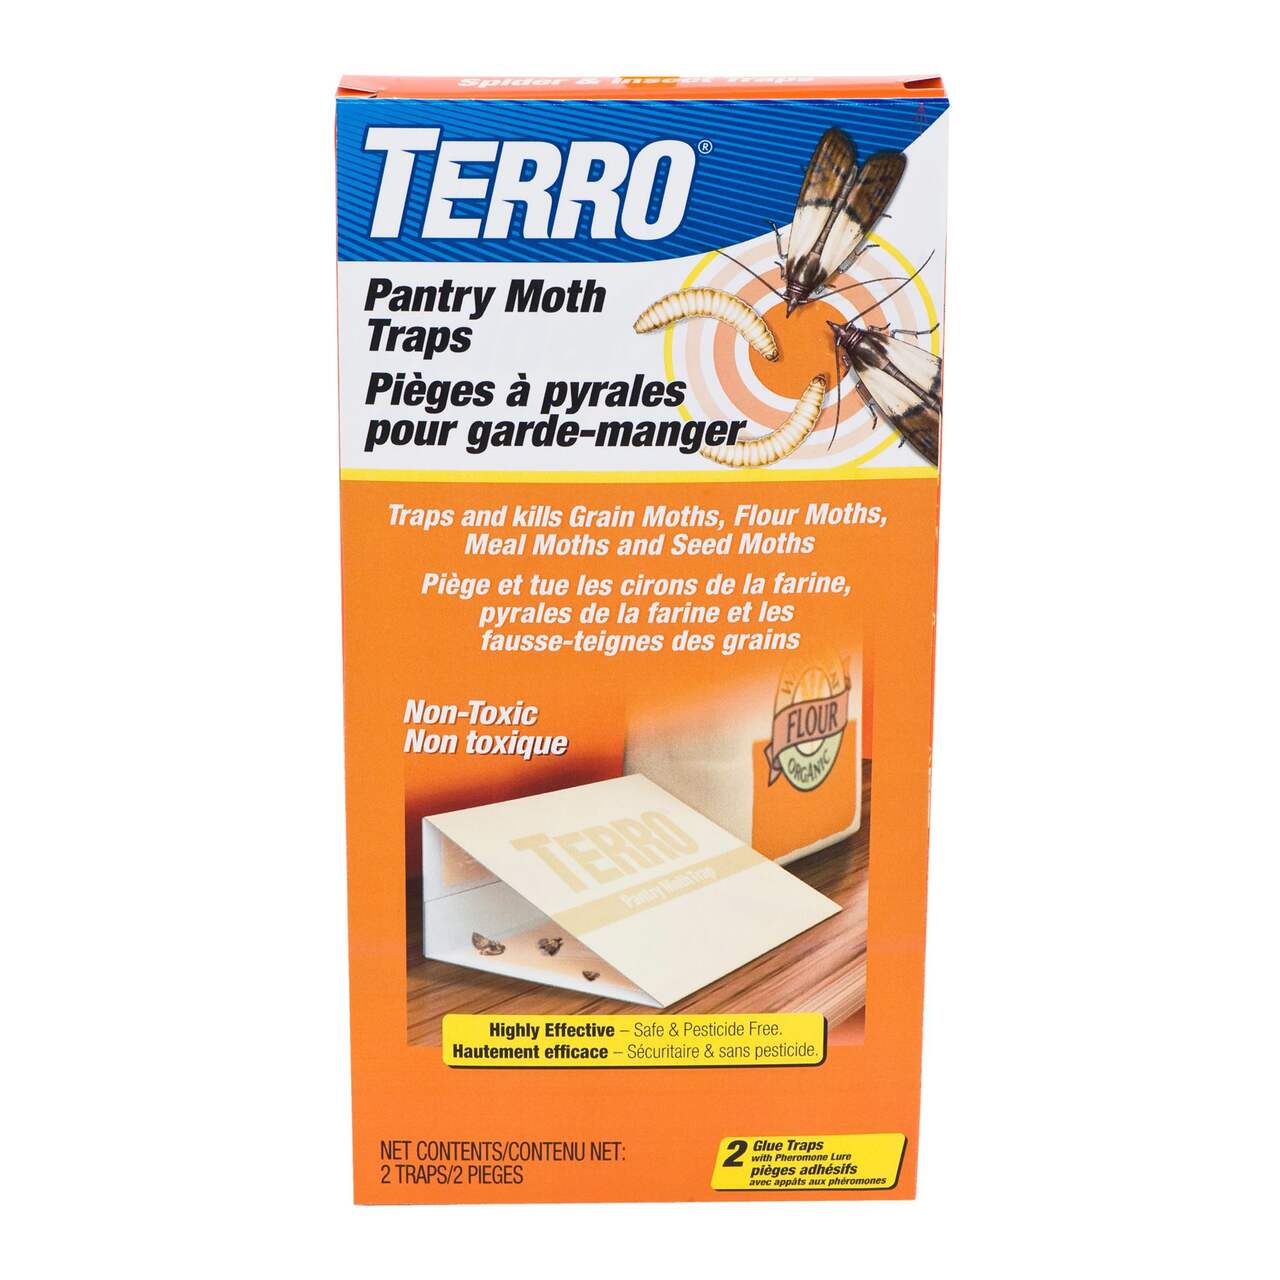 https://media-www.canadiantire.ca/product/seasonal-gardening/gardening/weed-insect-rodent-control/0598872/terro-pantry-moth-trap-3f66b40b-221d-45cd-a246-613e7d354fcc-jpgrendition.jpg?imdensity=1&imwidth=640&impolicy=mZoom